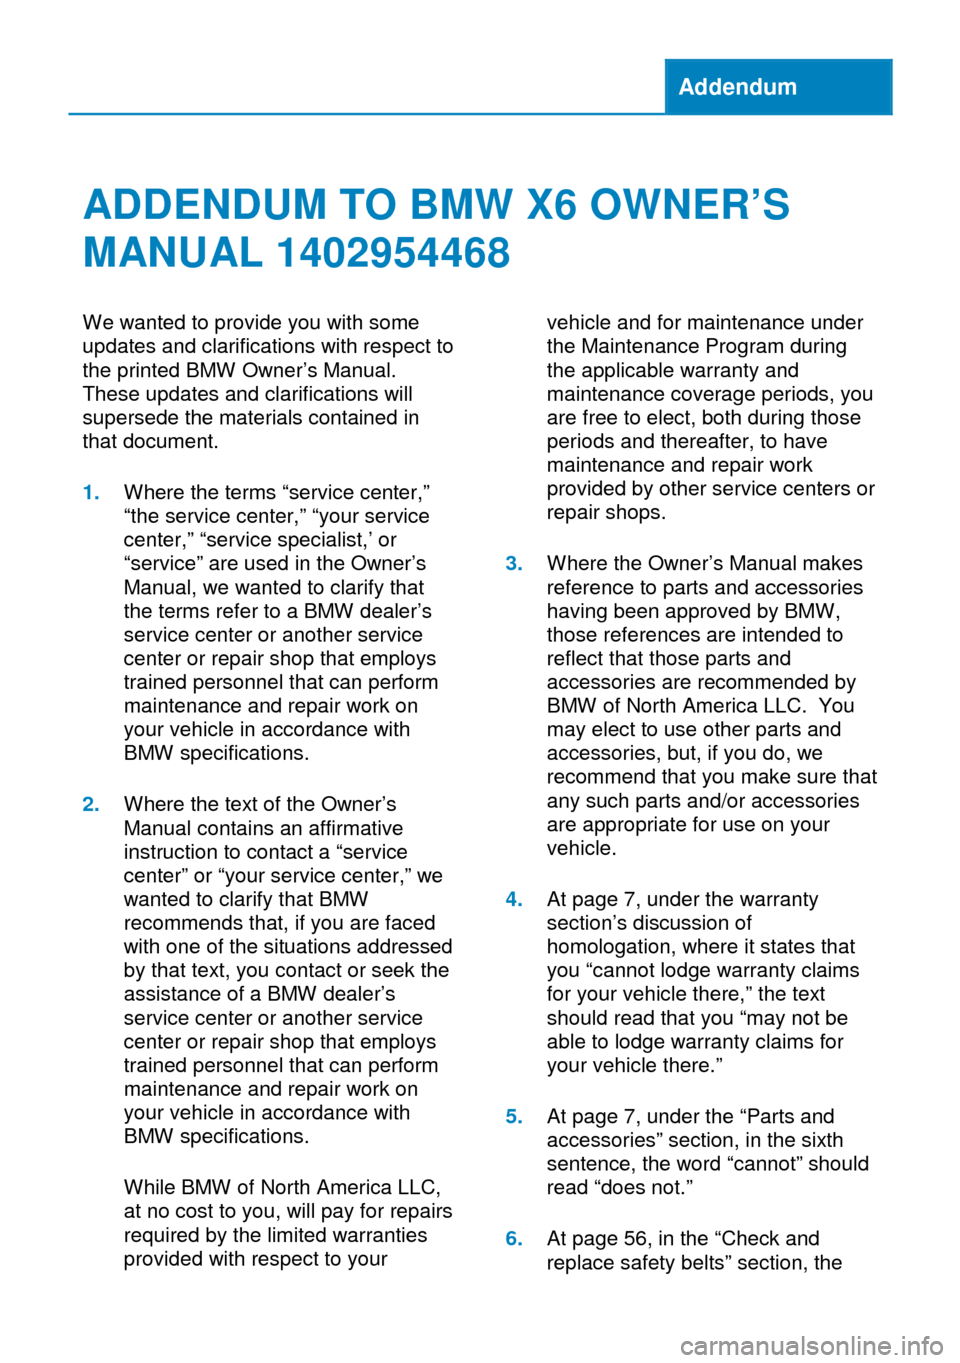 BMW X6 2014 F16 Owners Manual Addendum
ADDENDUM TO BMW X6 OWNER’S
MANUAL 1402954468
We wanted to provide you with some
updates and clarifications with respect to
the printed BMW Owner’s Manual.
These updates and clarifications